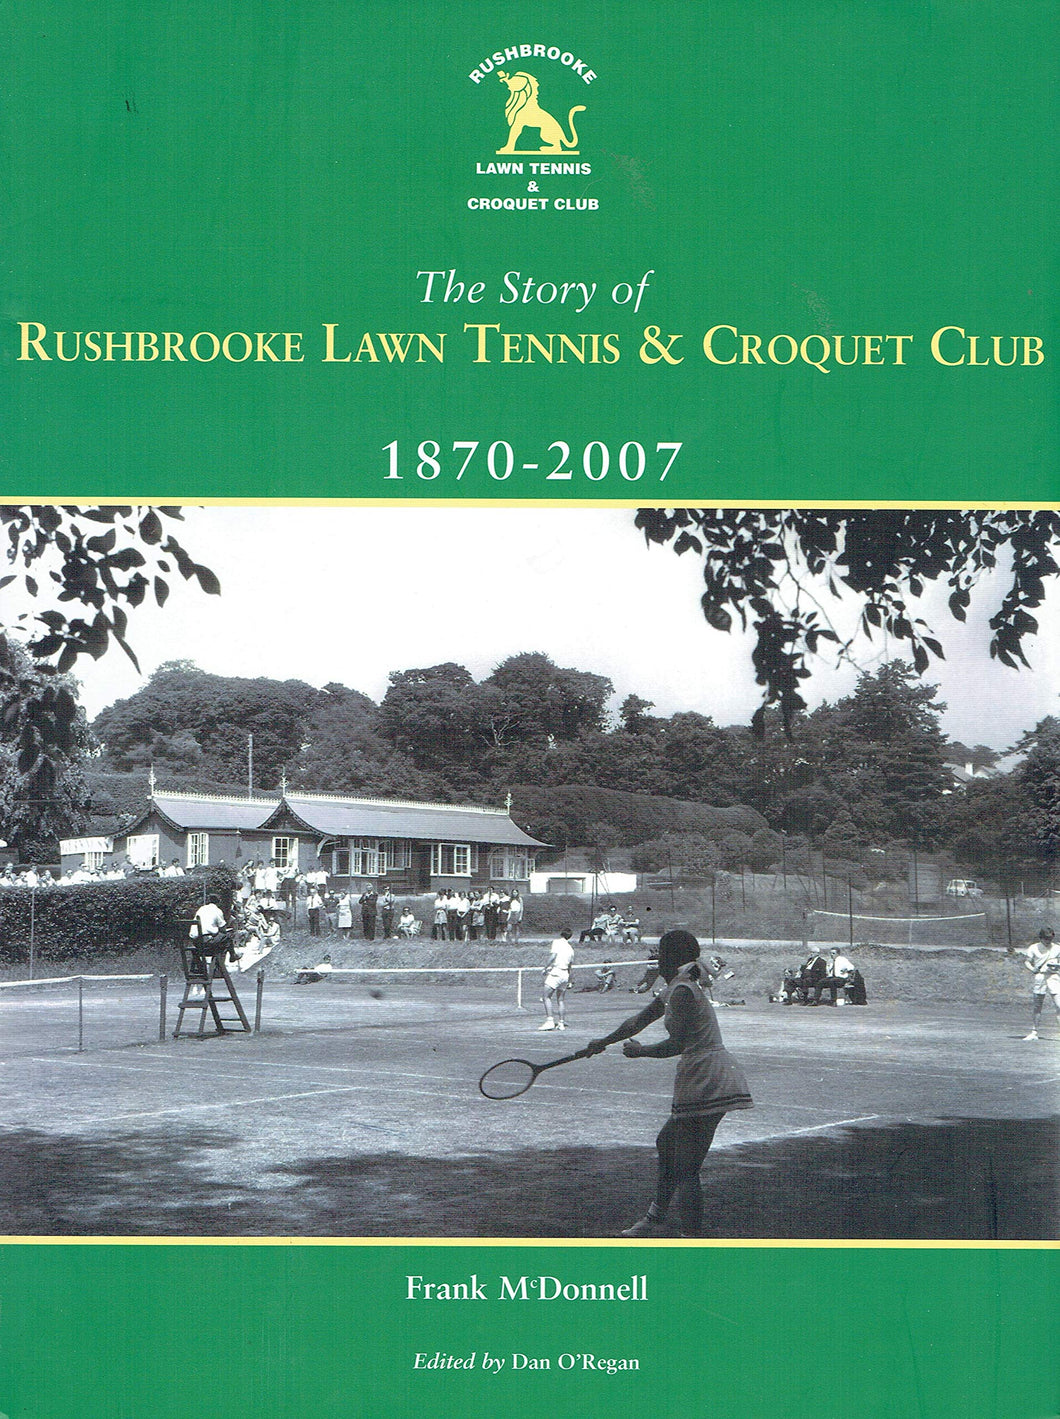 The Story of Rushbrooke Lawn Tennis and Croquet Club, 1870-2007